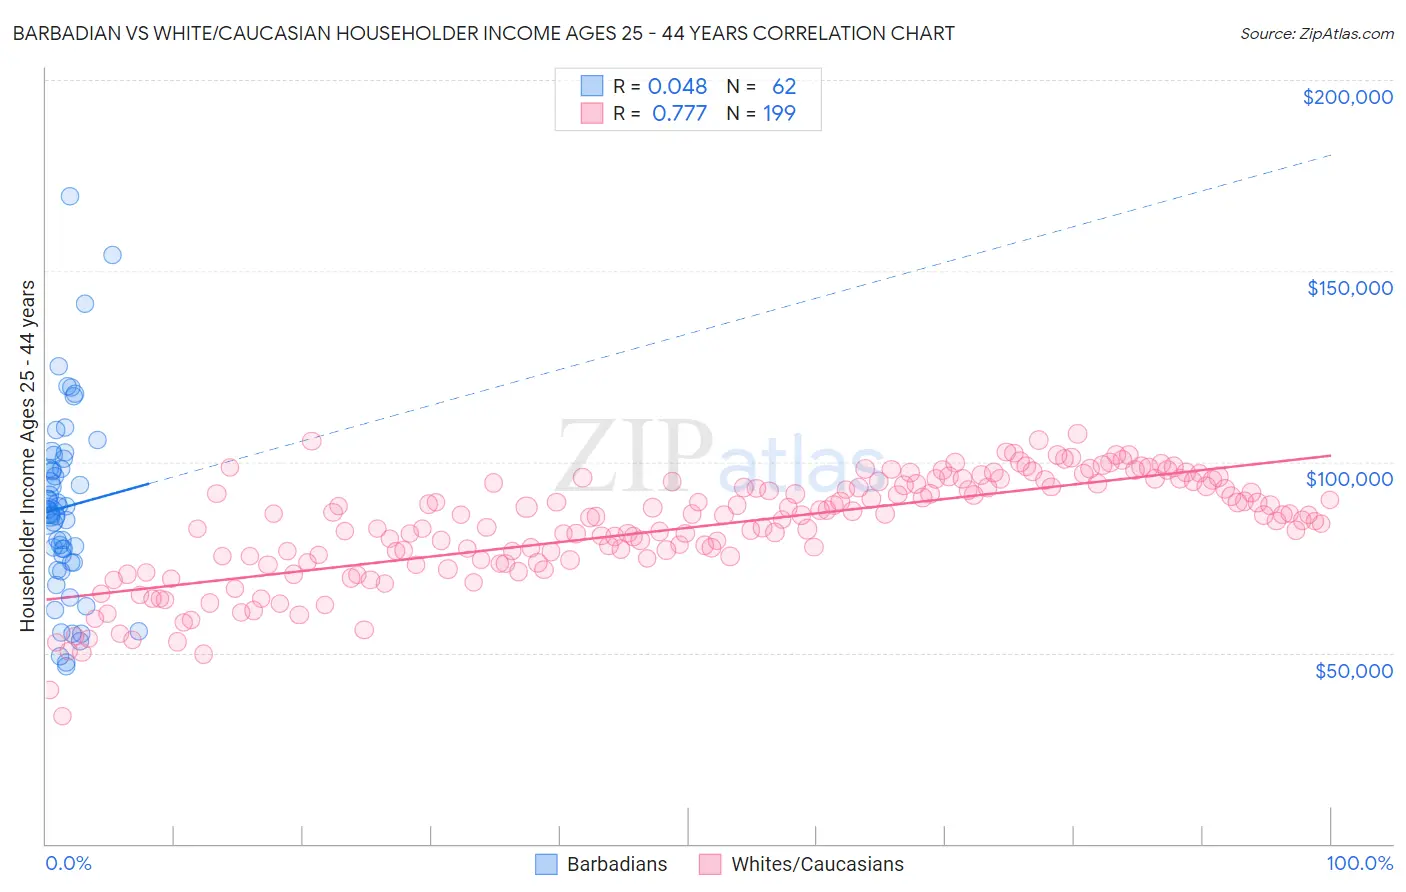 Barbadian vs White/Caucasian Householder Income Ages 25 - 44 years